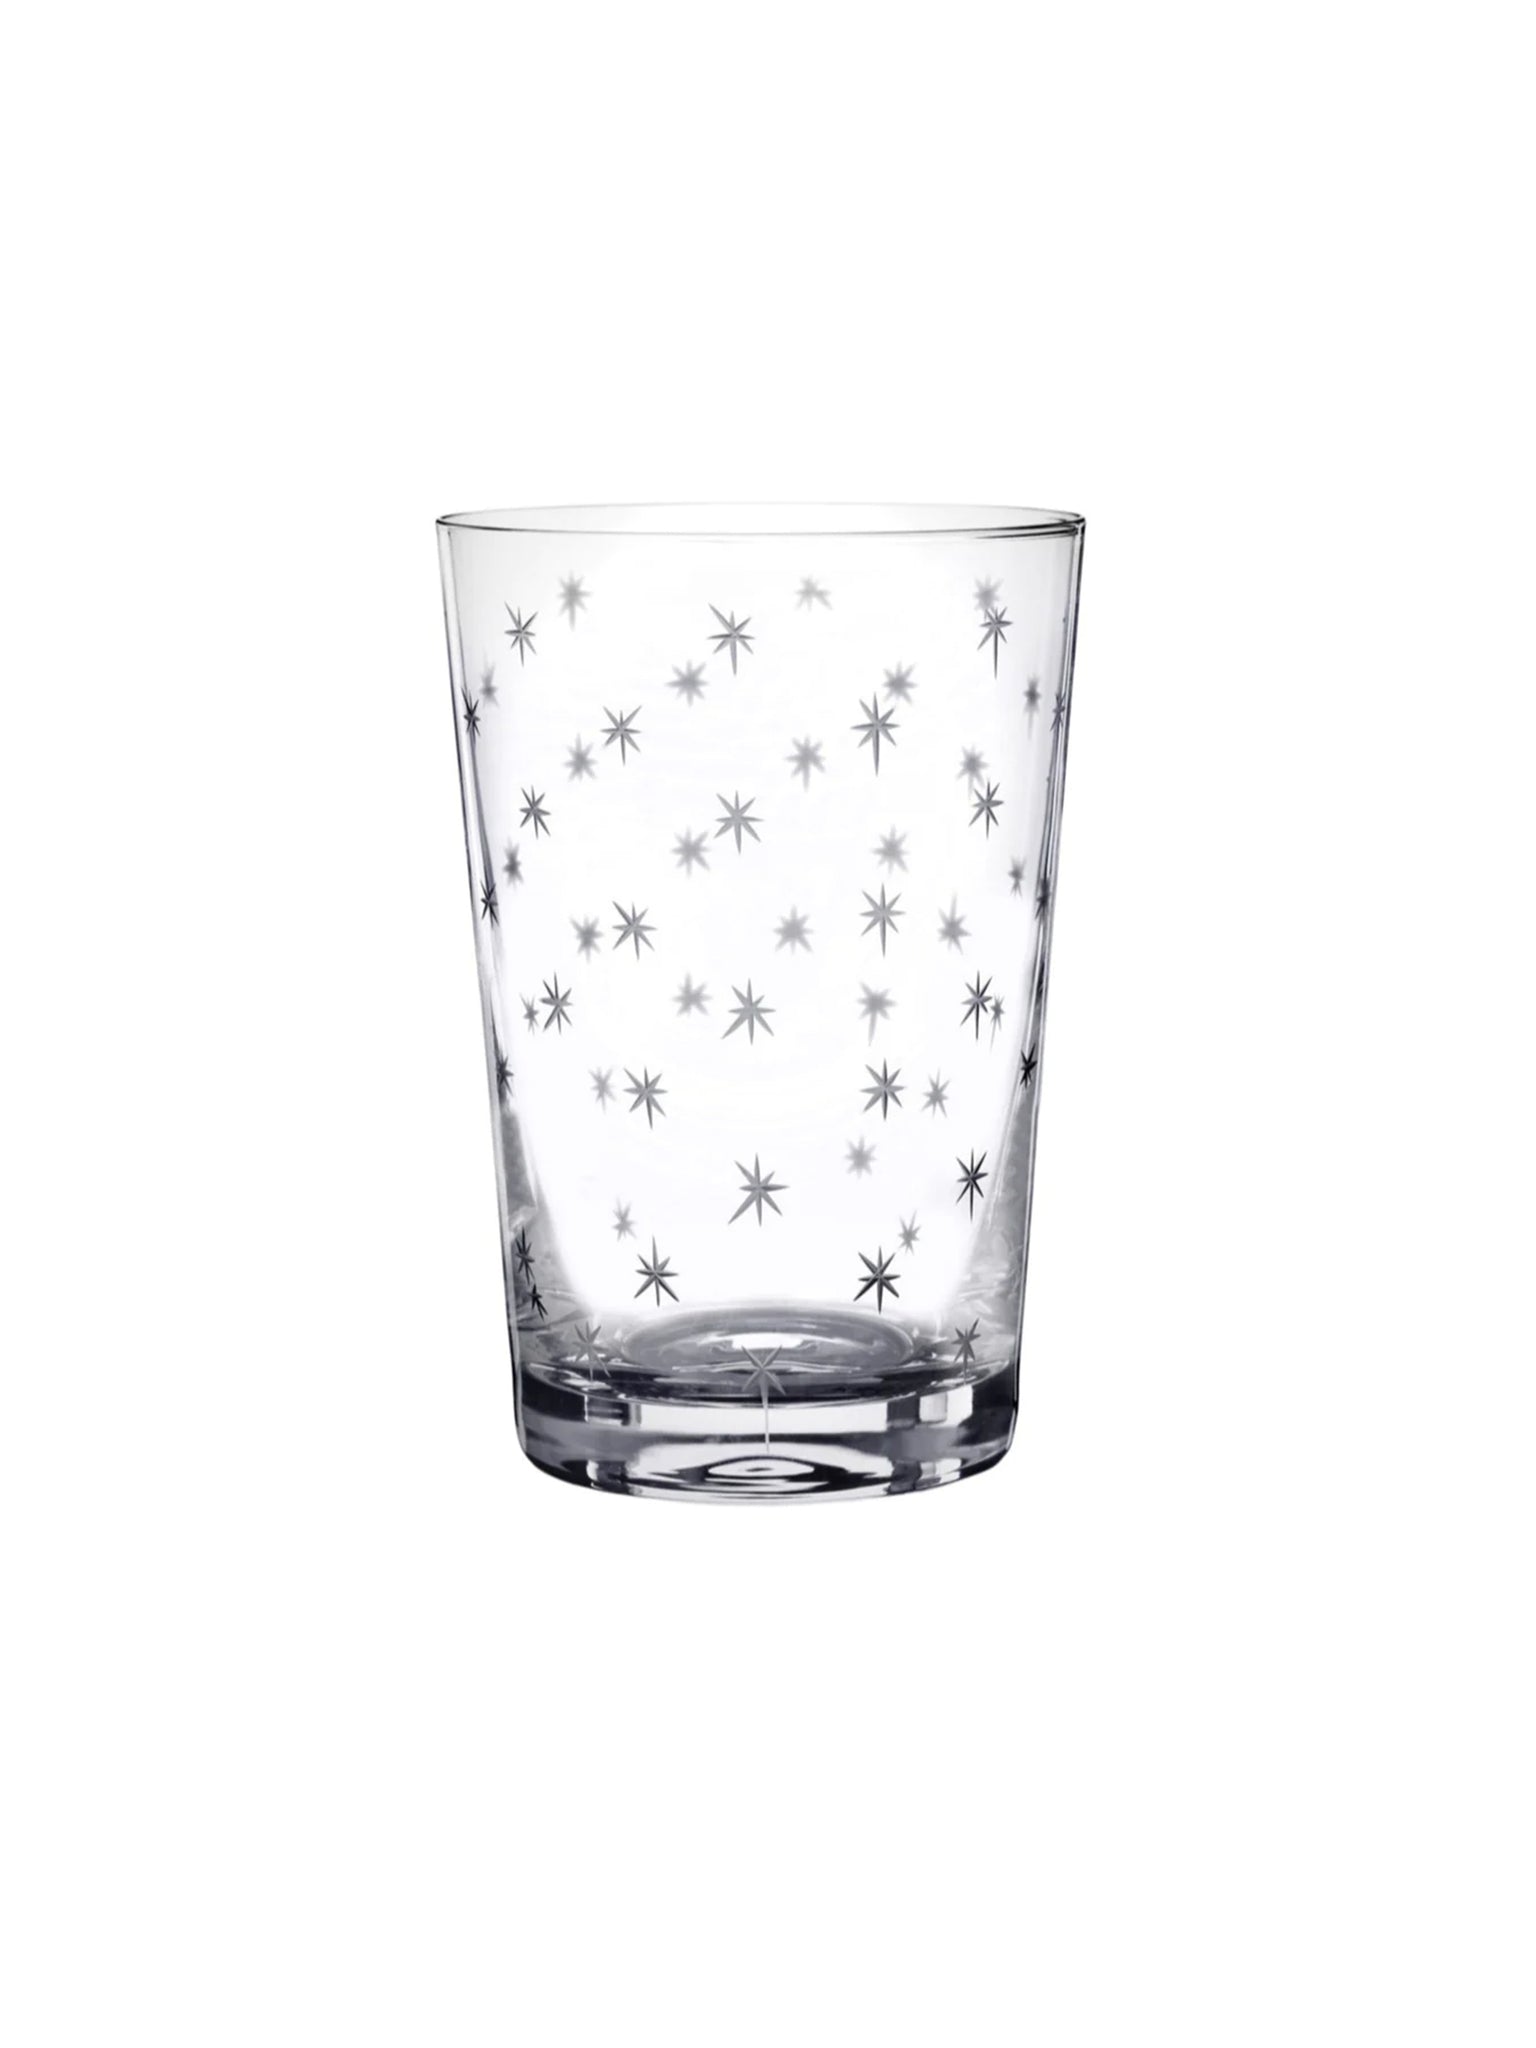   Crystal Tumbler with Stars Weston Table